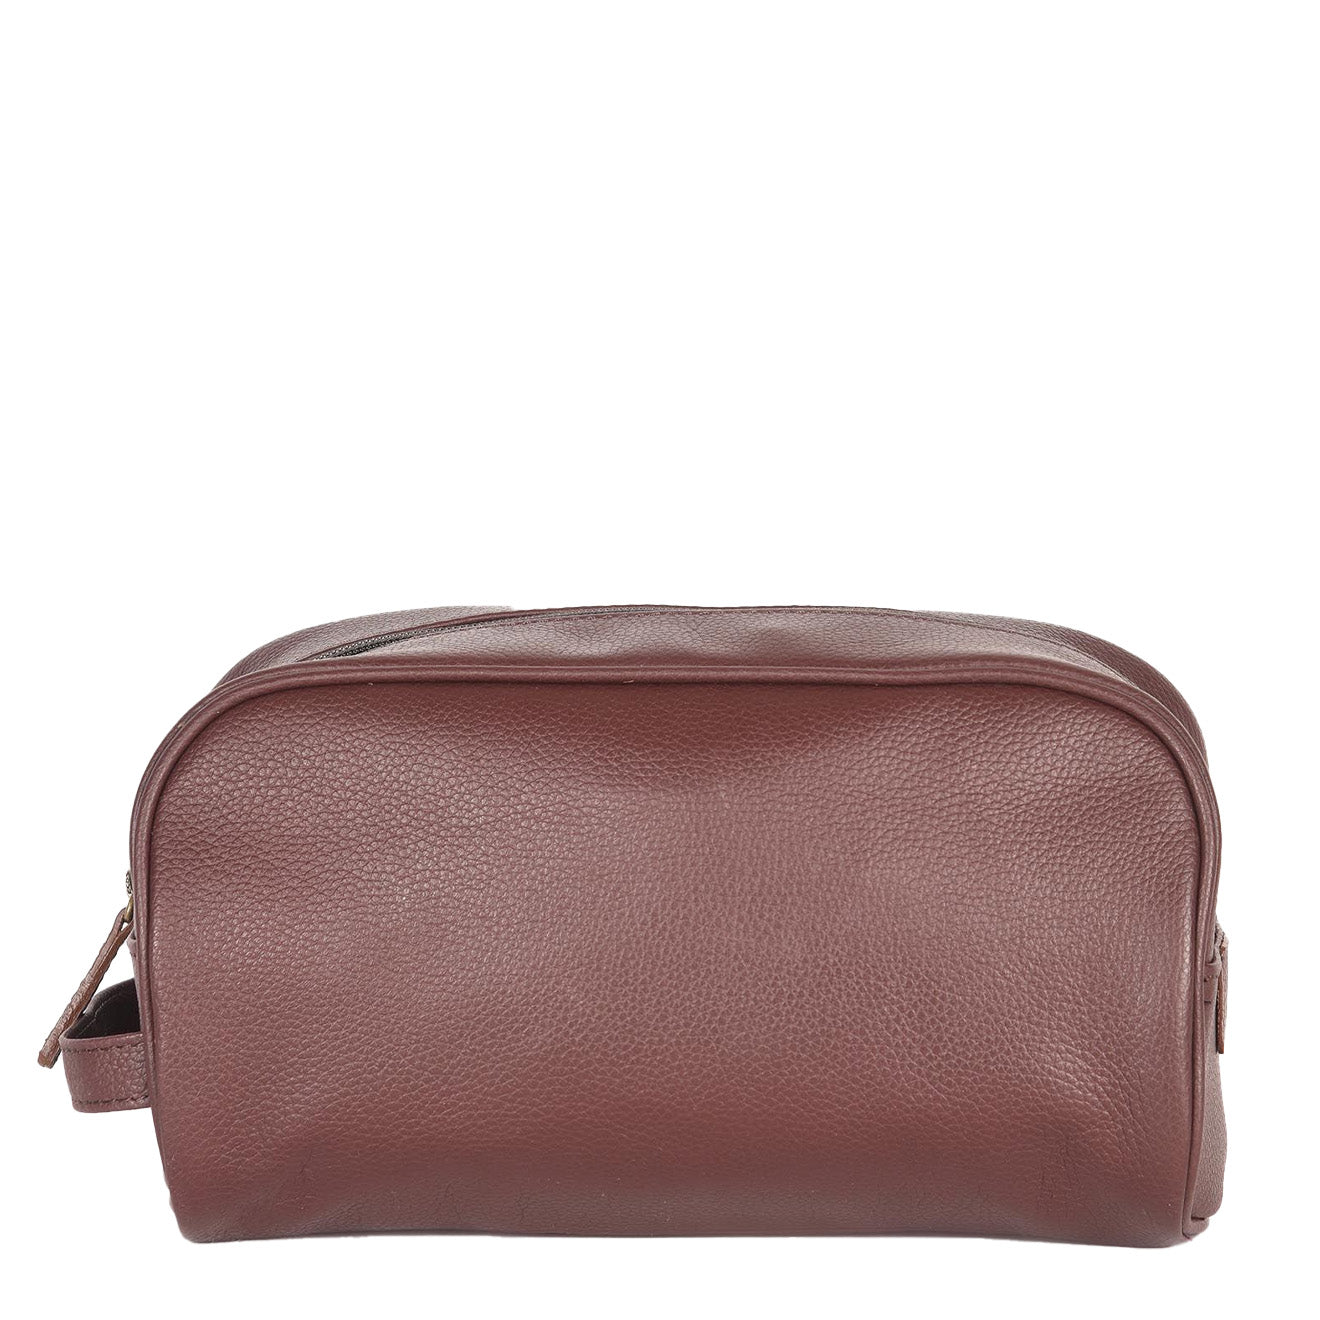 Barbour Leather Wash Bag Dark Brown | The Sporting Lodge